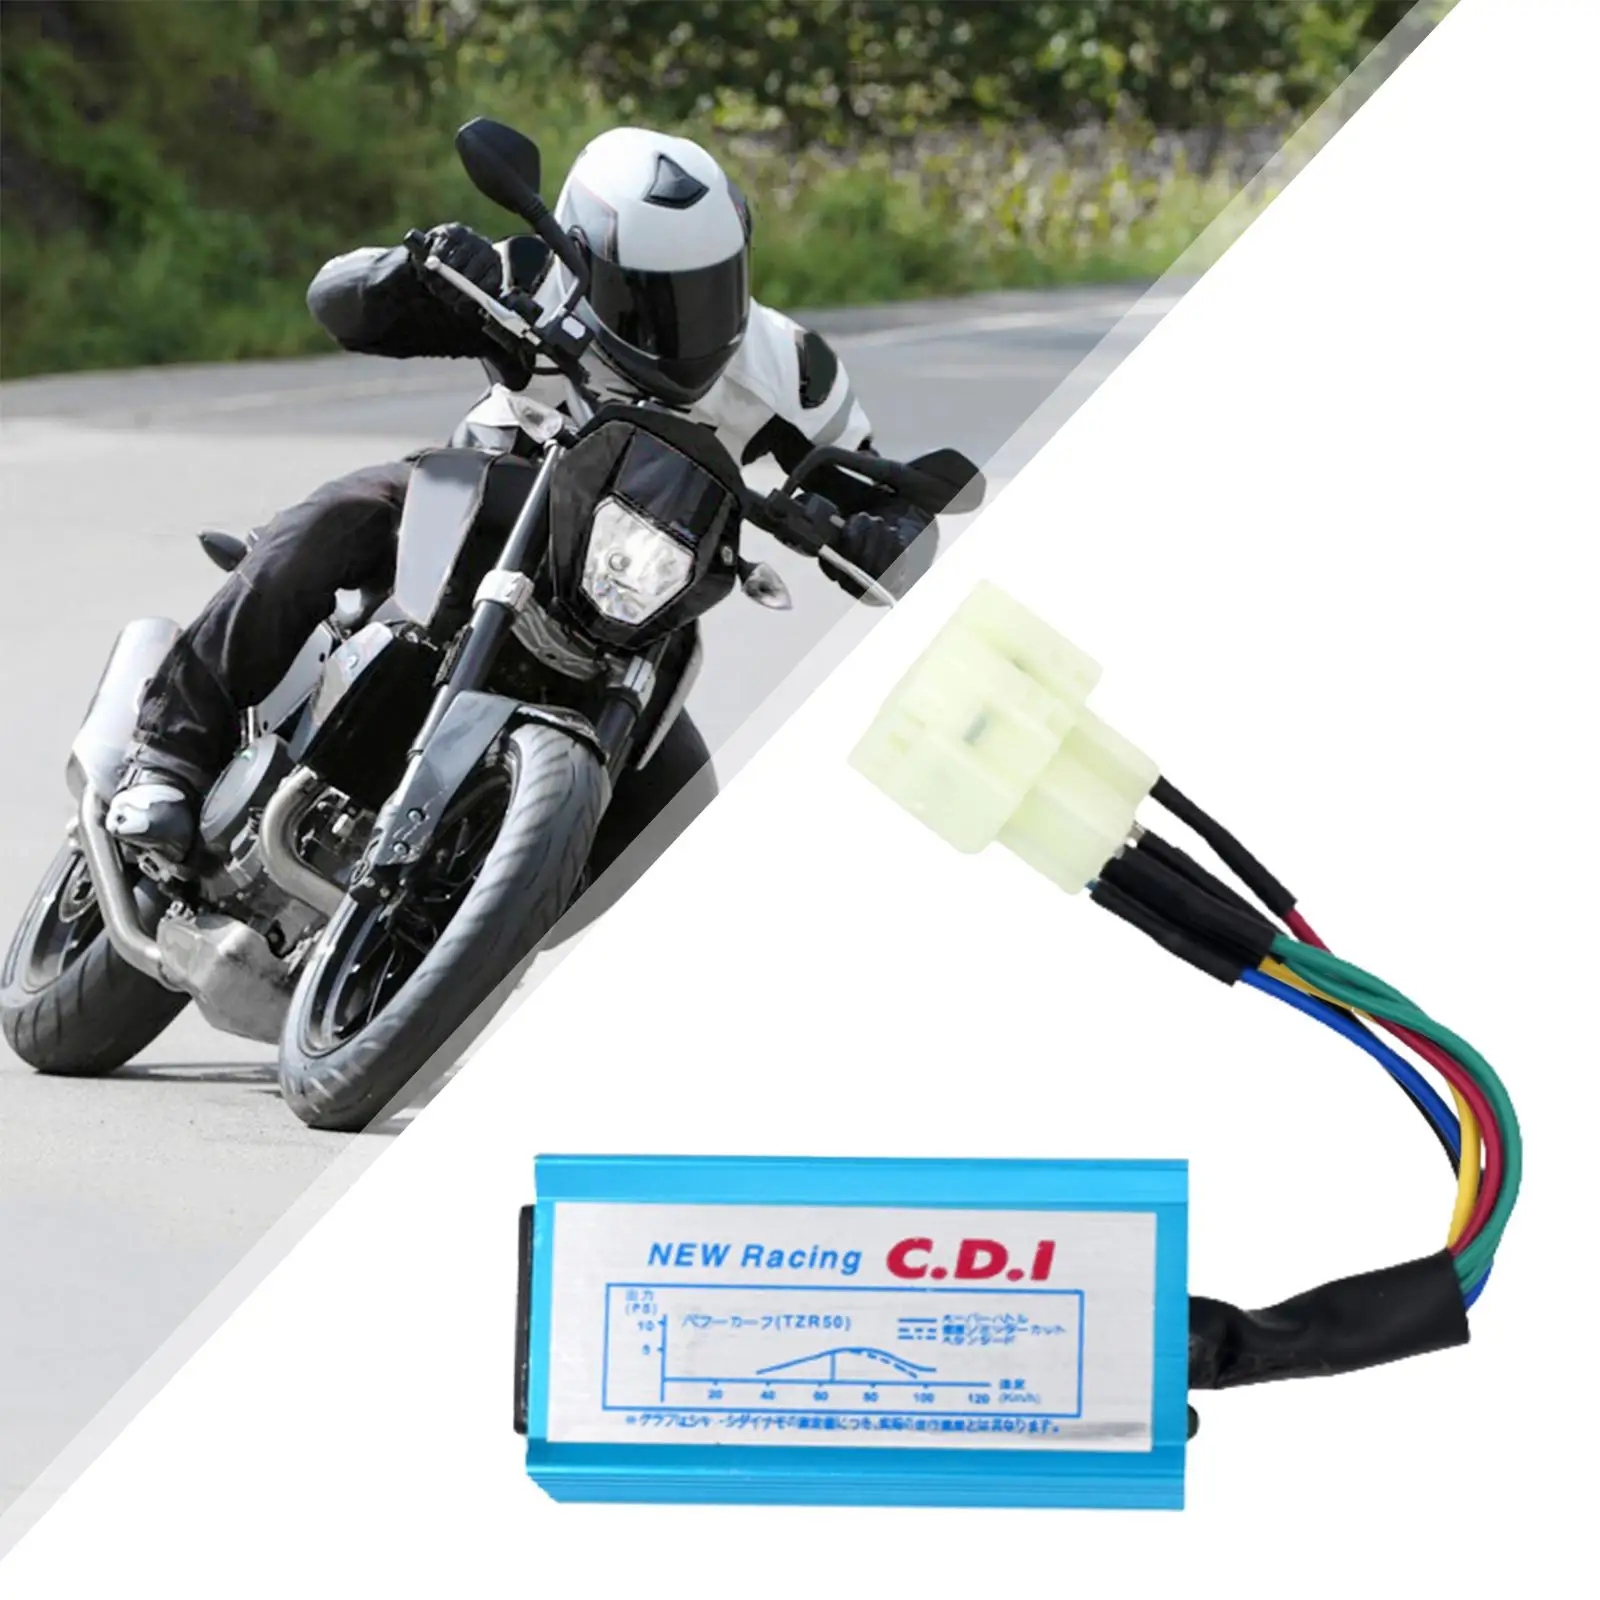 6Pins Gy6  Cdi Box Aluminum Alloy  Performance for Gy6 50cc-250cc Series Engines Locomotives Motorbikes Motorcycle Bike